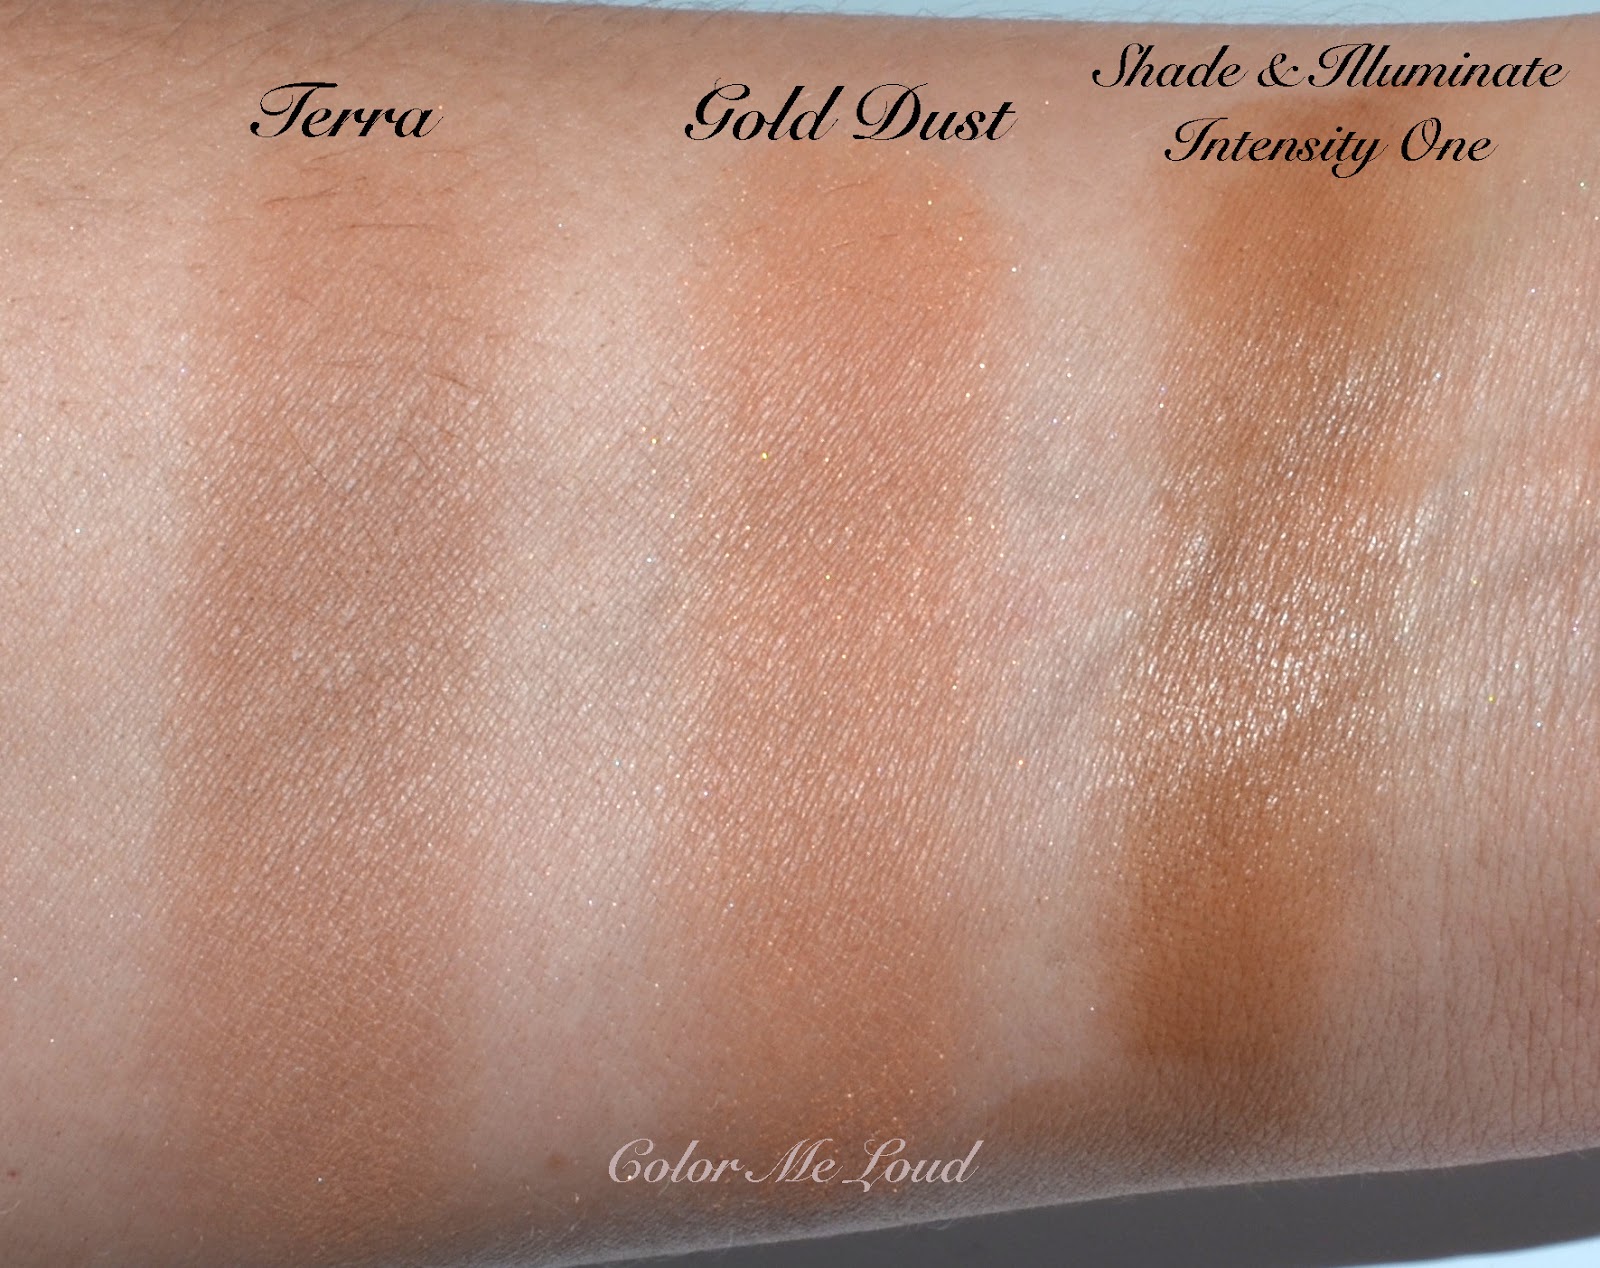 Tom Ford Bronzers, Terra, Gold Dust, Shade & Illuminate Intensity One,  Review, Swatch, Comparison & FOTD | Color Me Loud